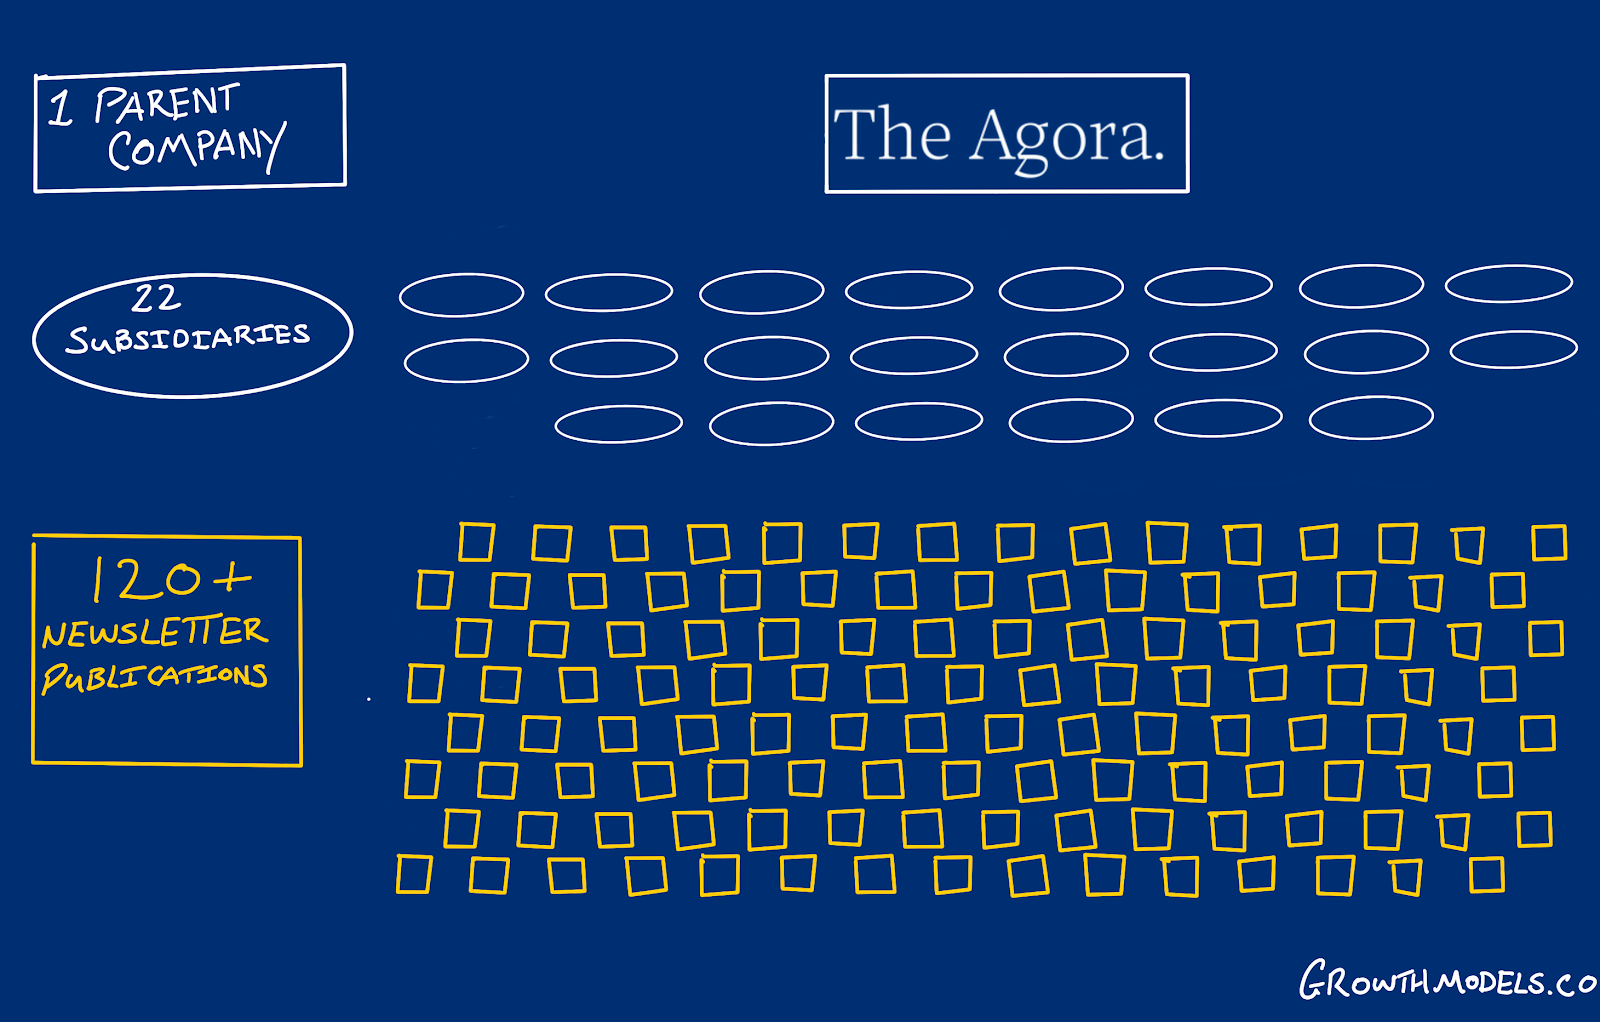 The basic overview of the Agora's organisation